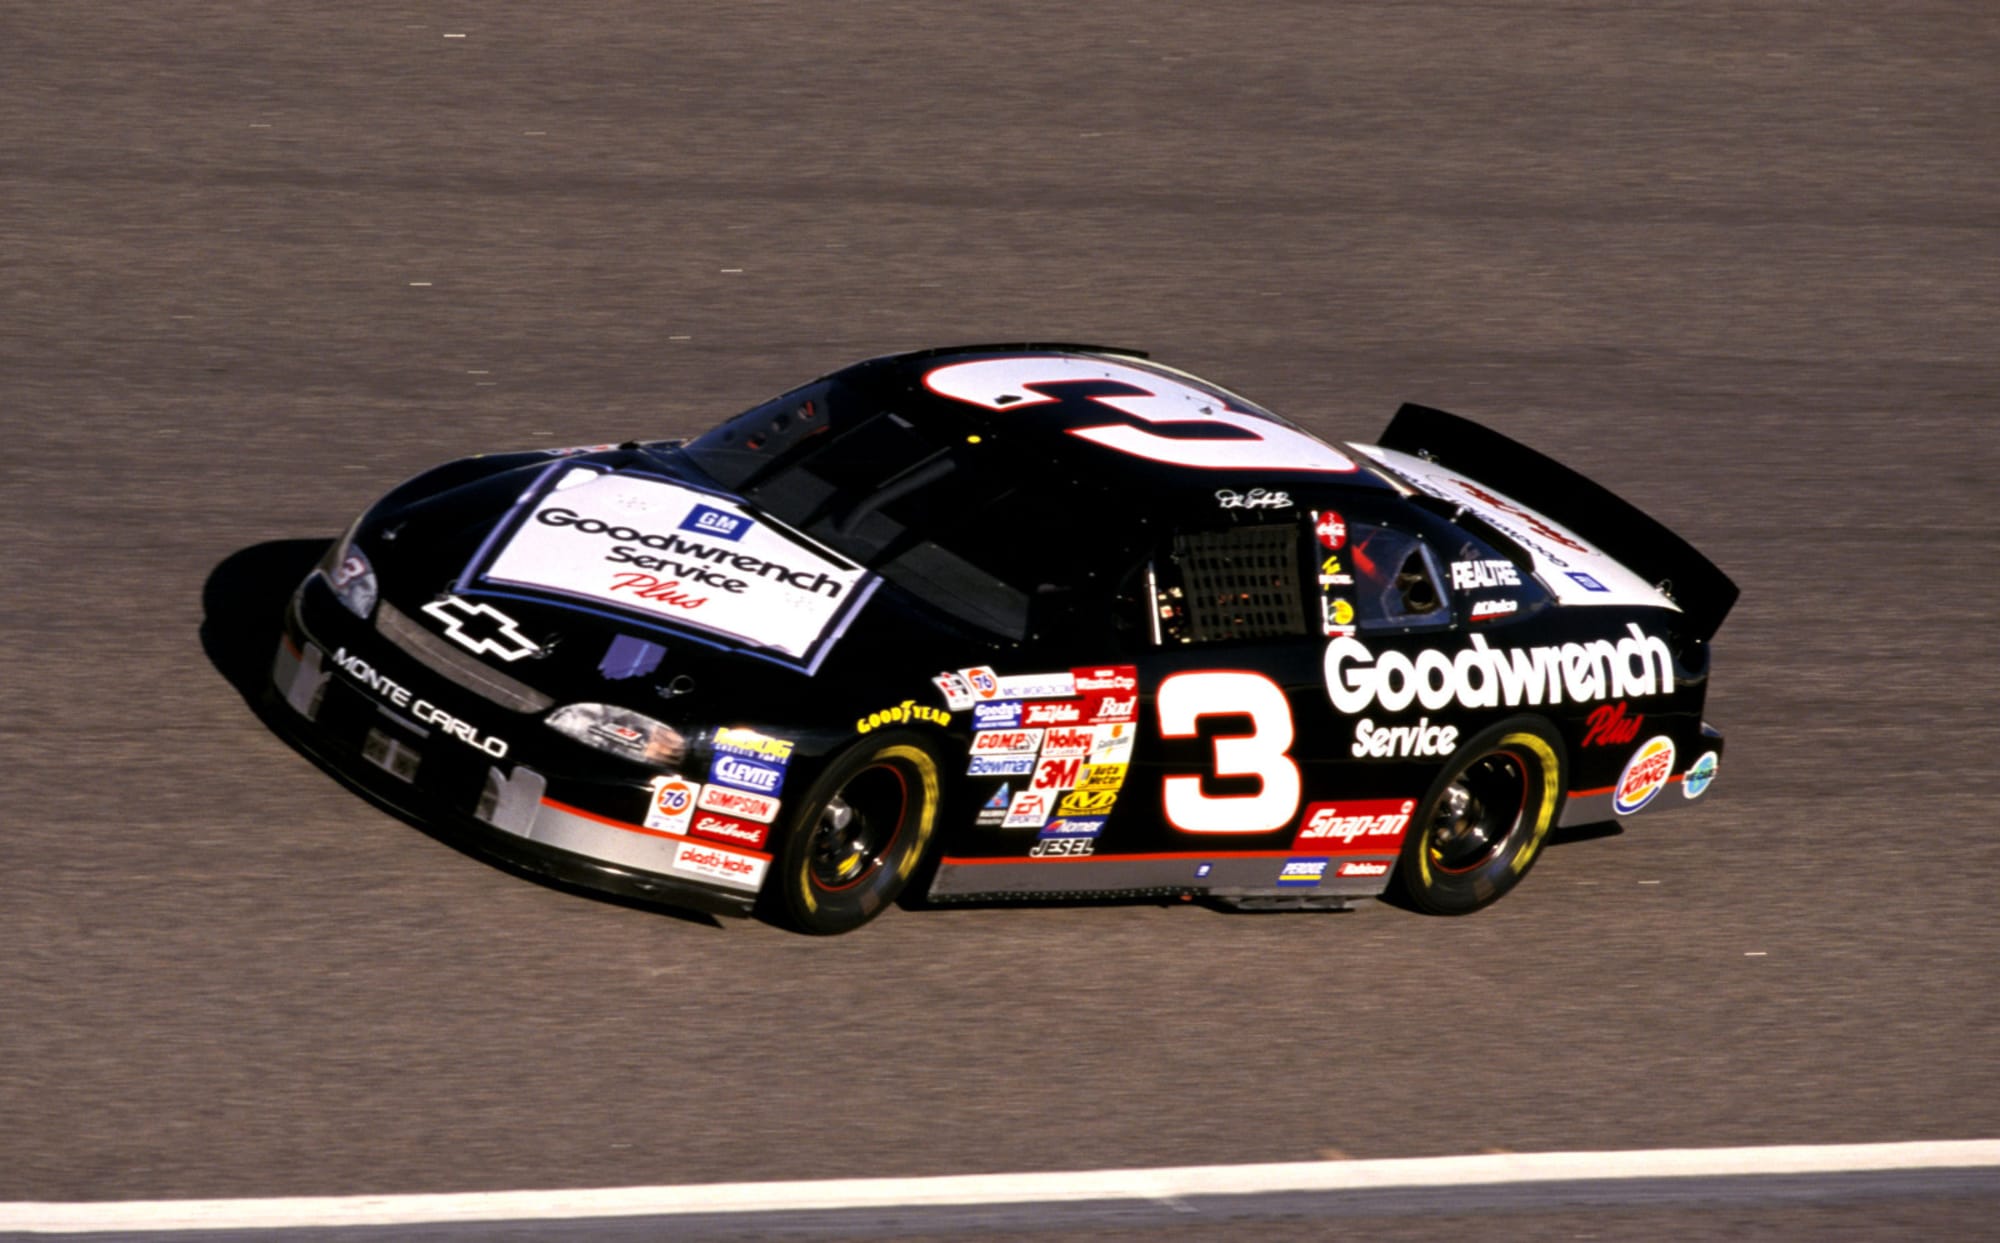 NASCAR Cup Series: Dale Earnhardt's #3 being retired?